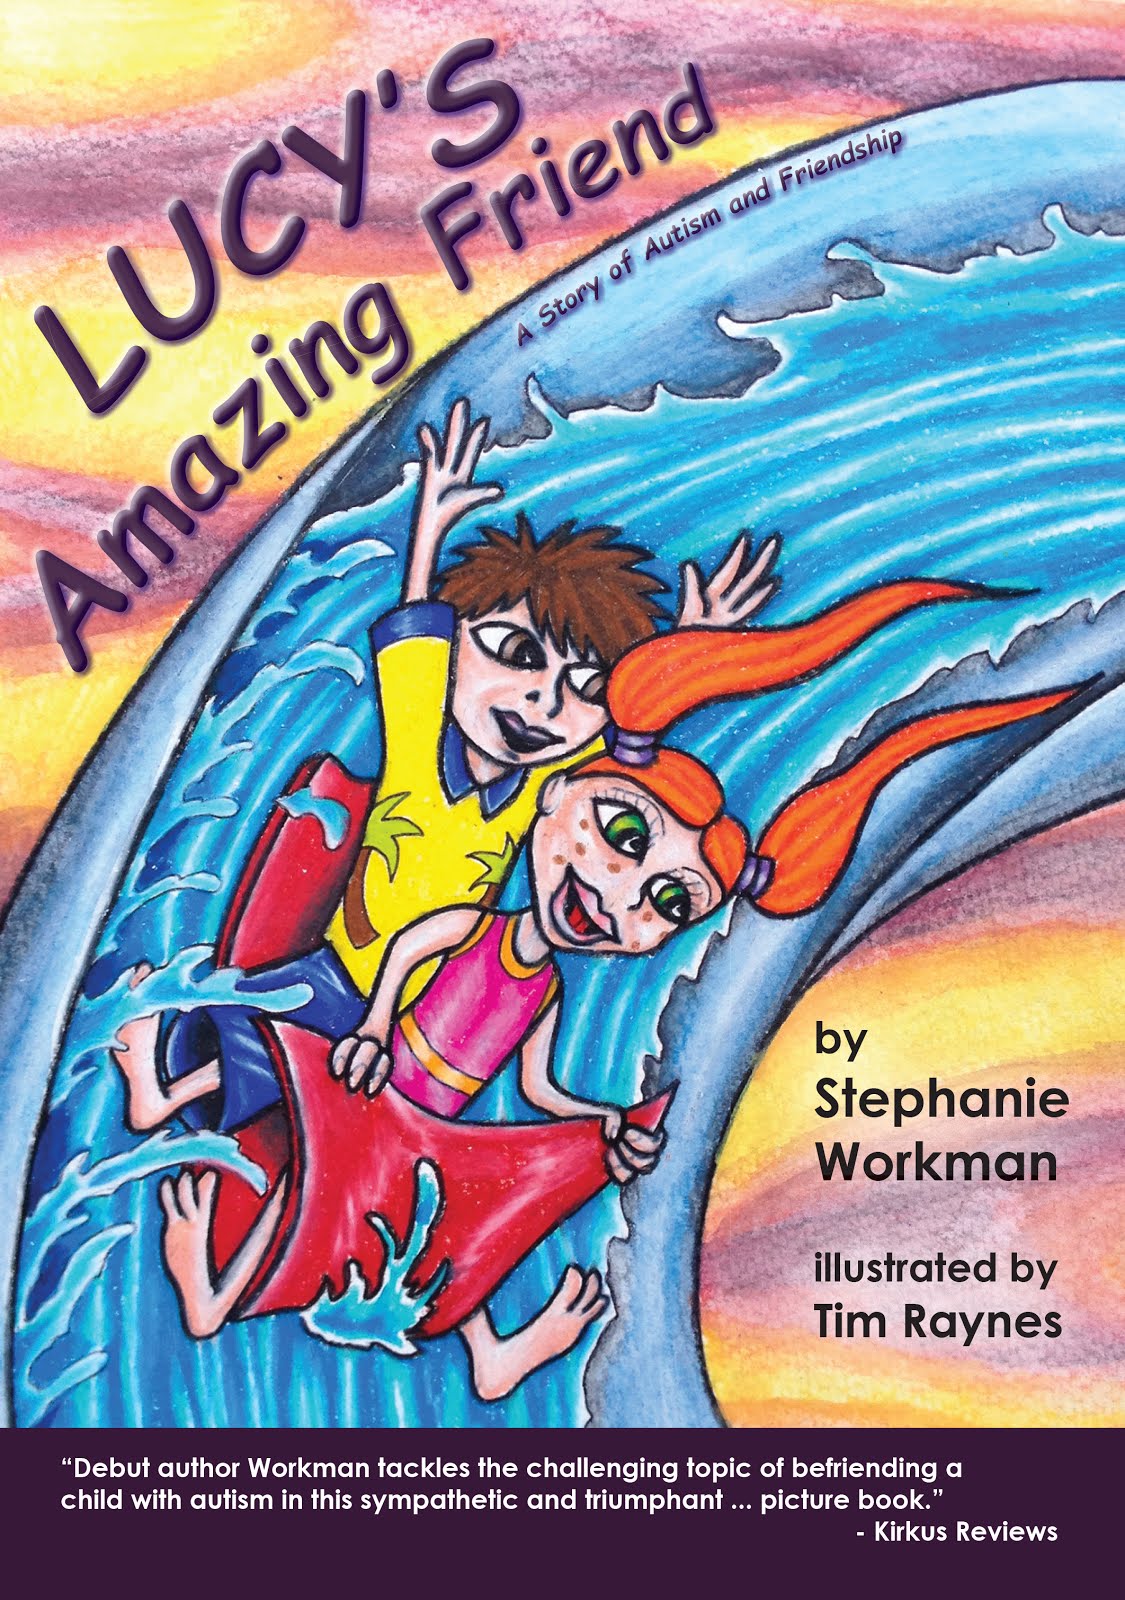 Lucy's Amazing Friend: A Story of Autism and Friendship